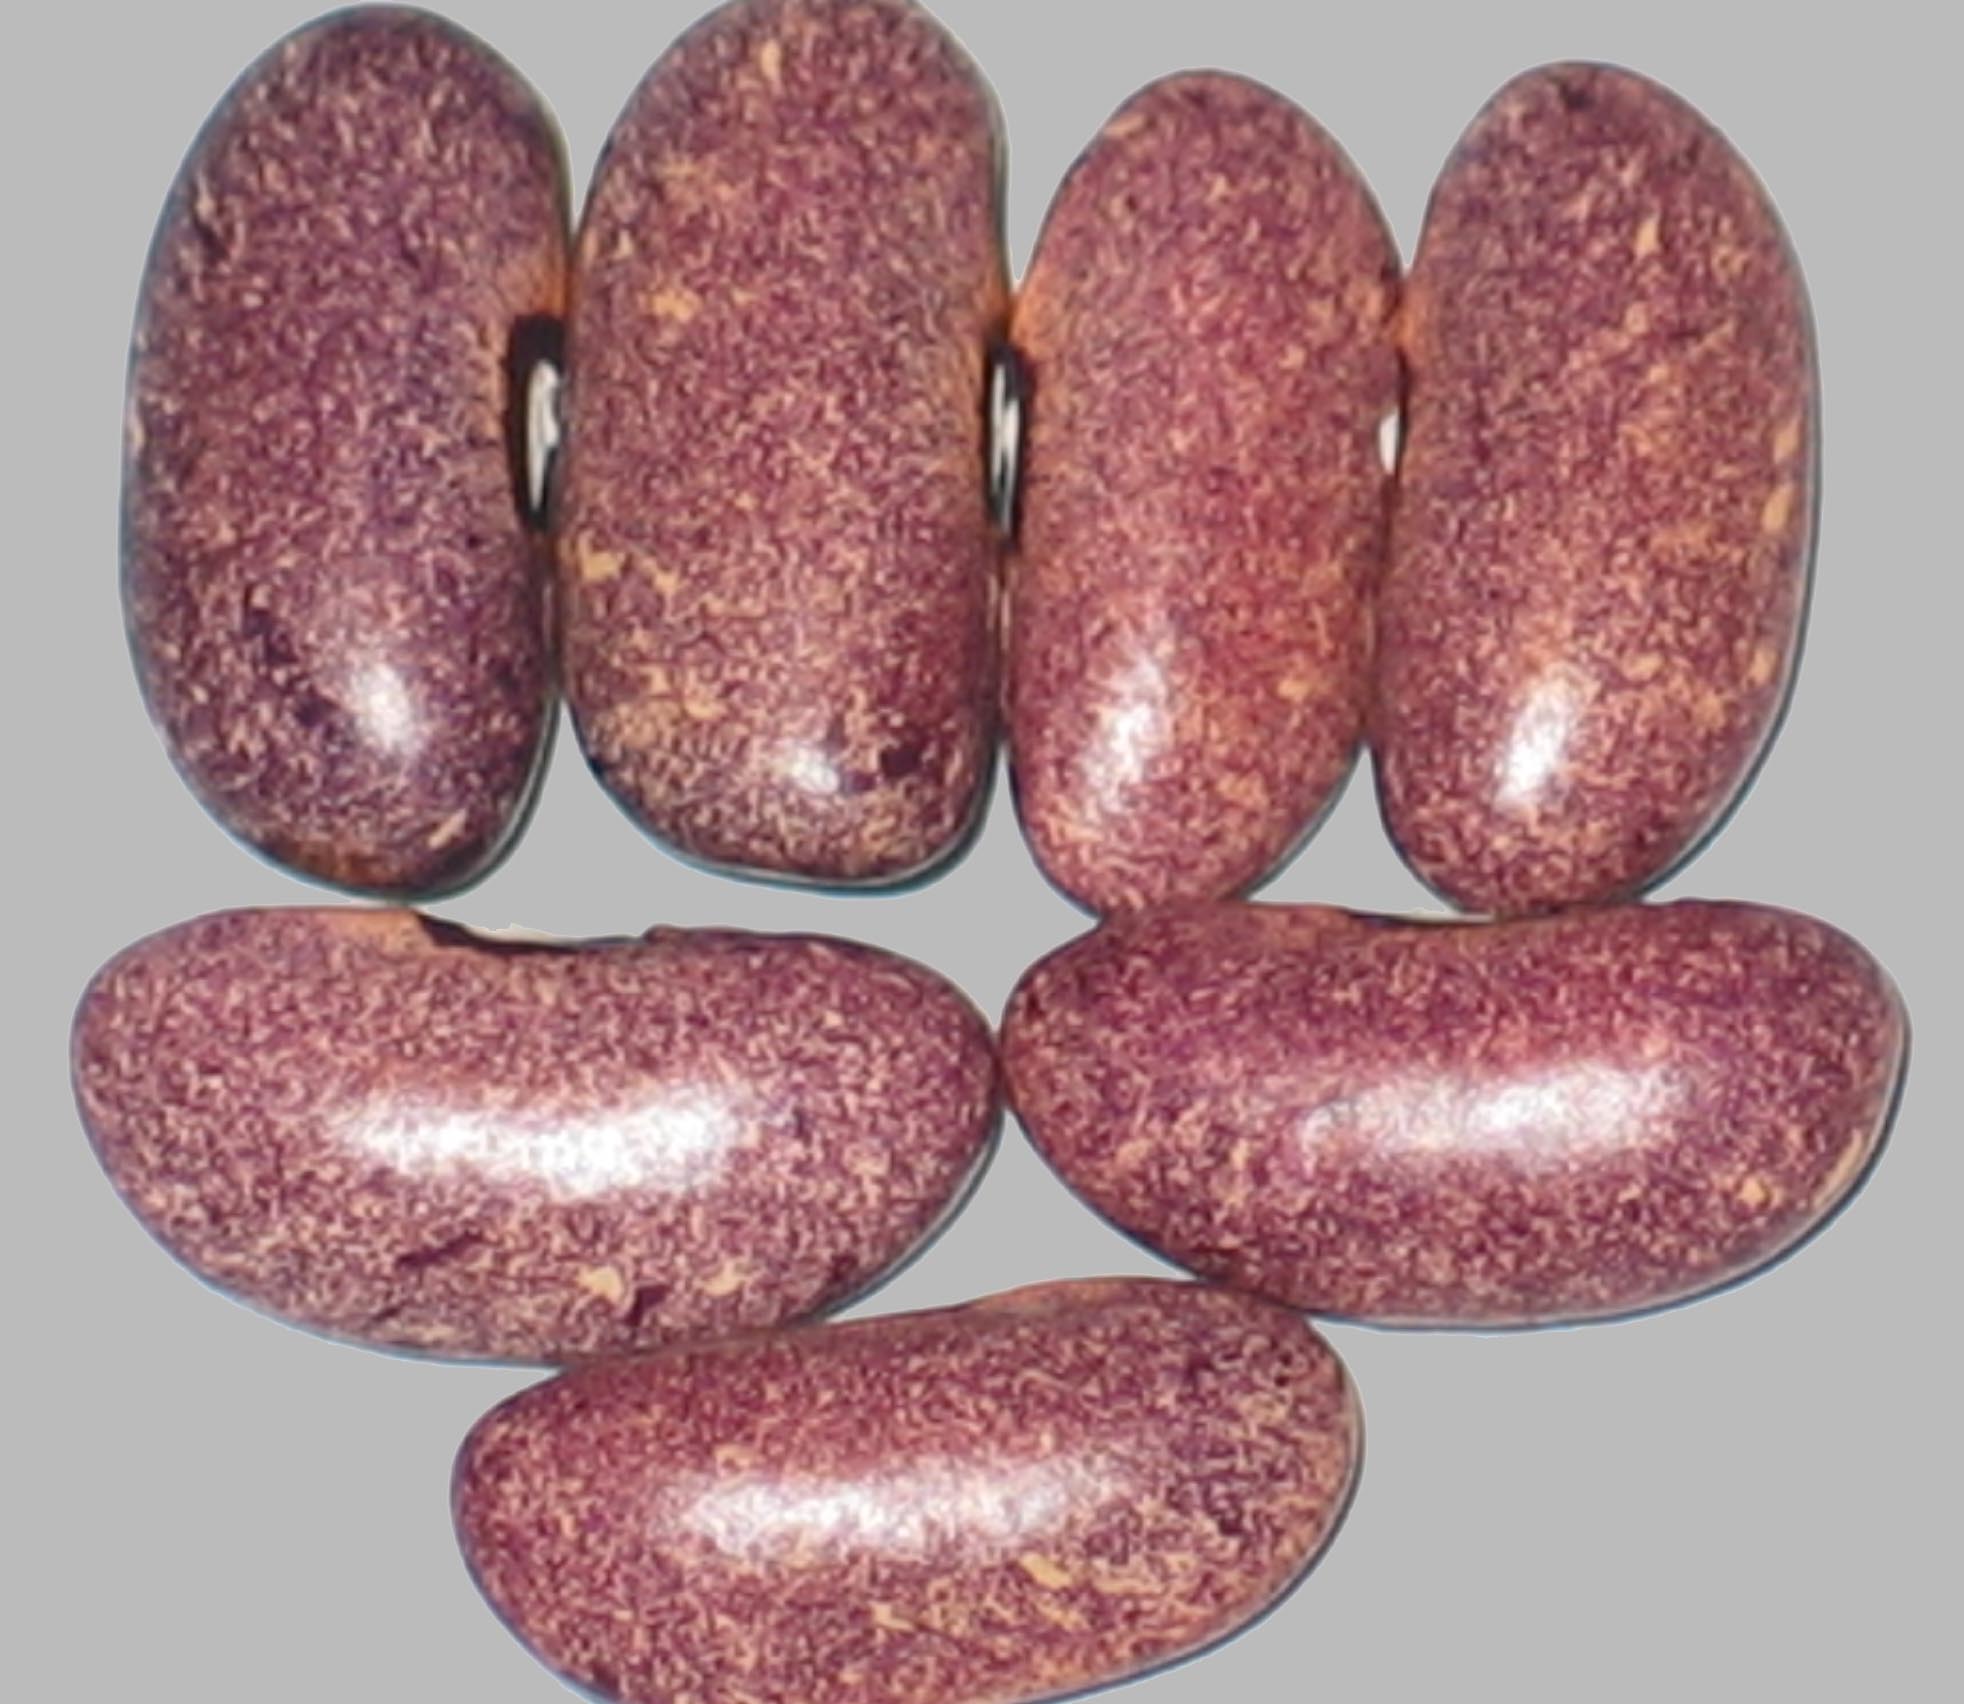 image of Provence beans